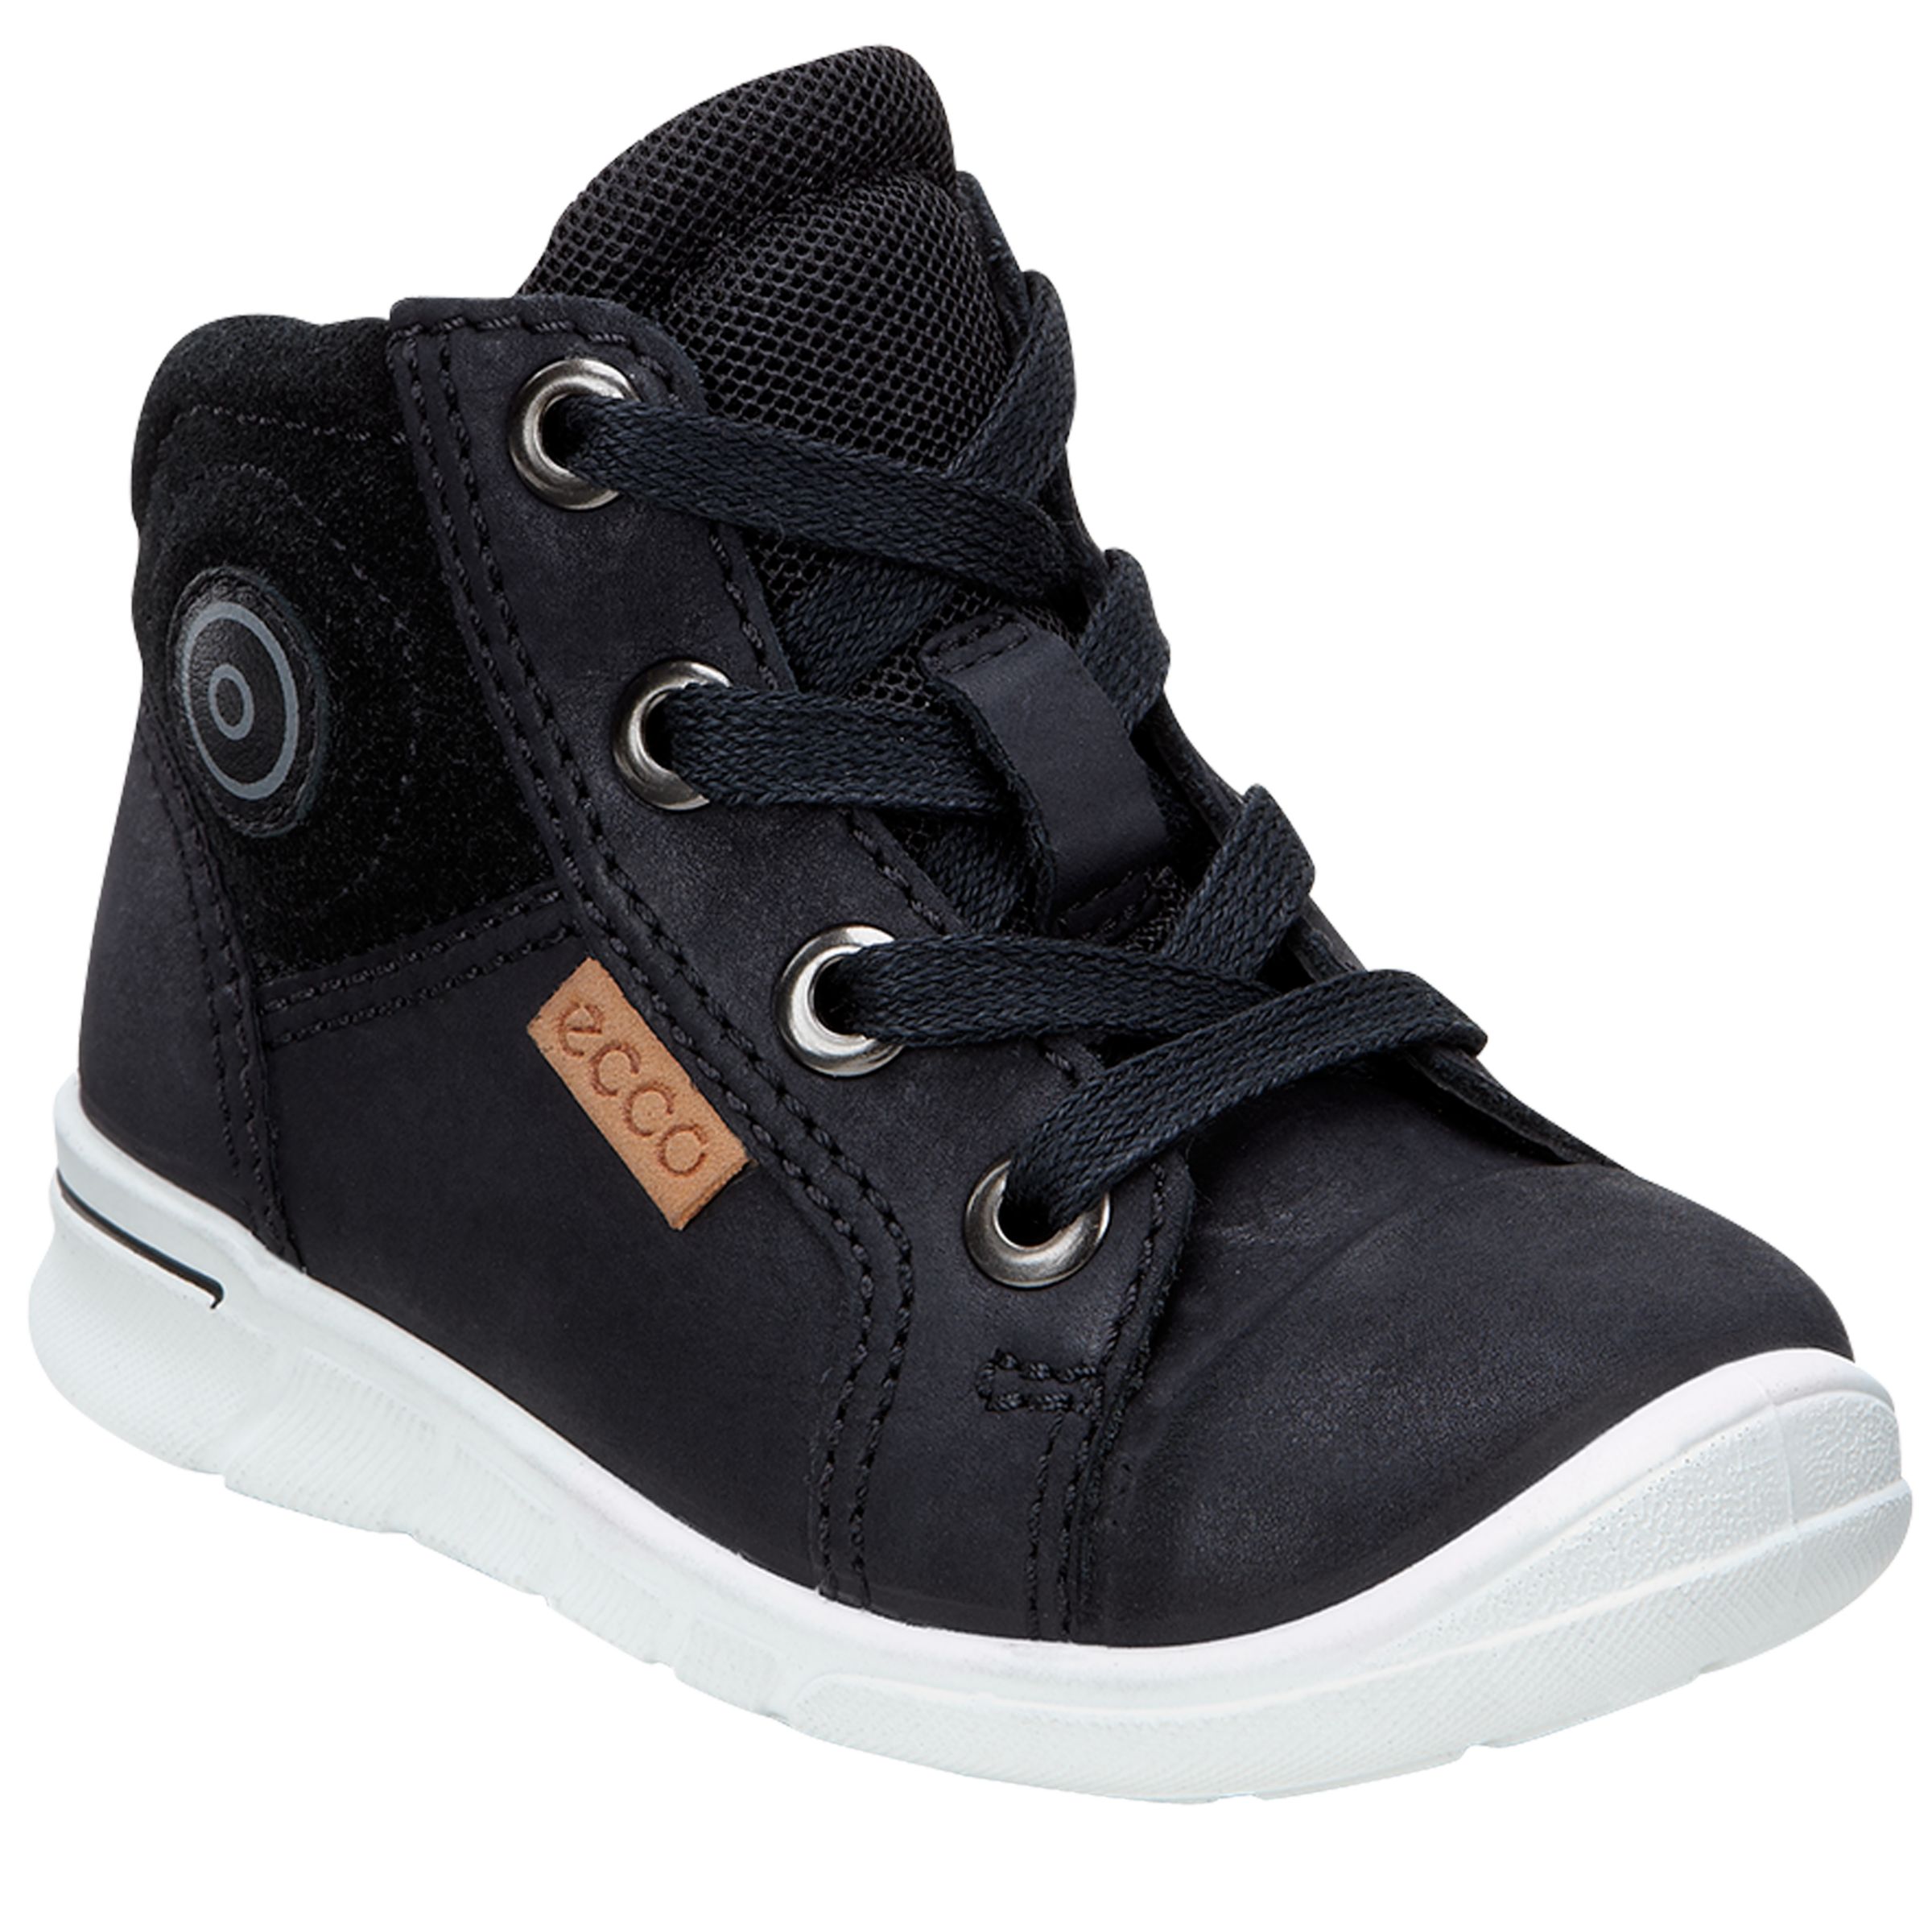 respektfuld tyngdekraft absorption ECCO Children's First Lace-Up Trainers, Black at John Lewis & Partners